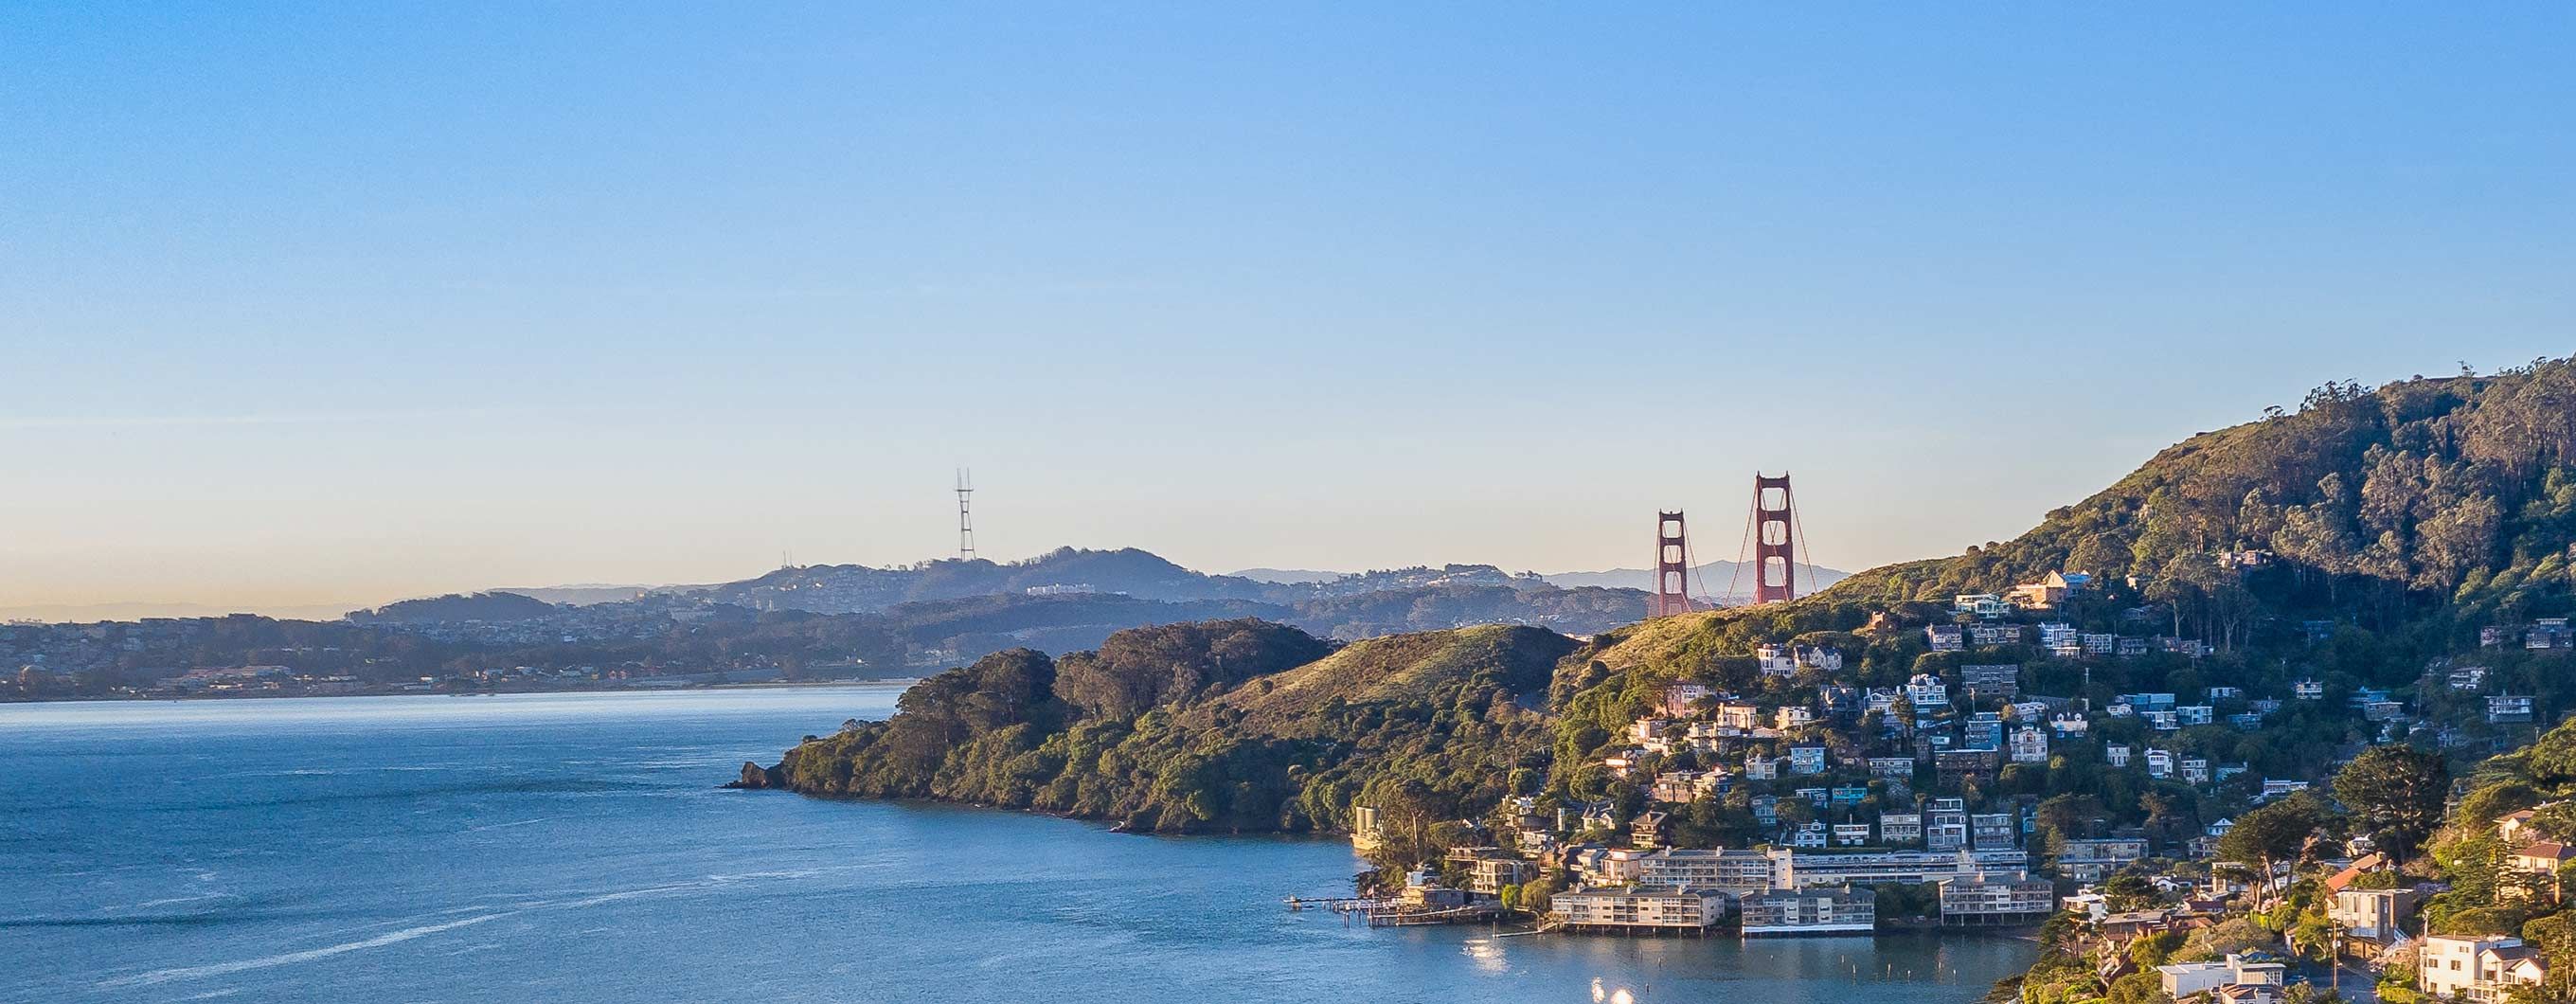 The bay area with mountains, water, homes and the golden gate bridge